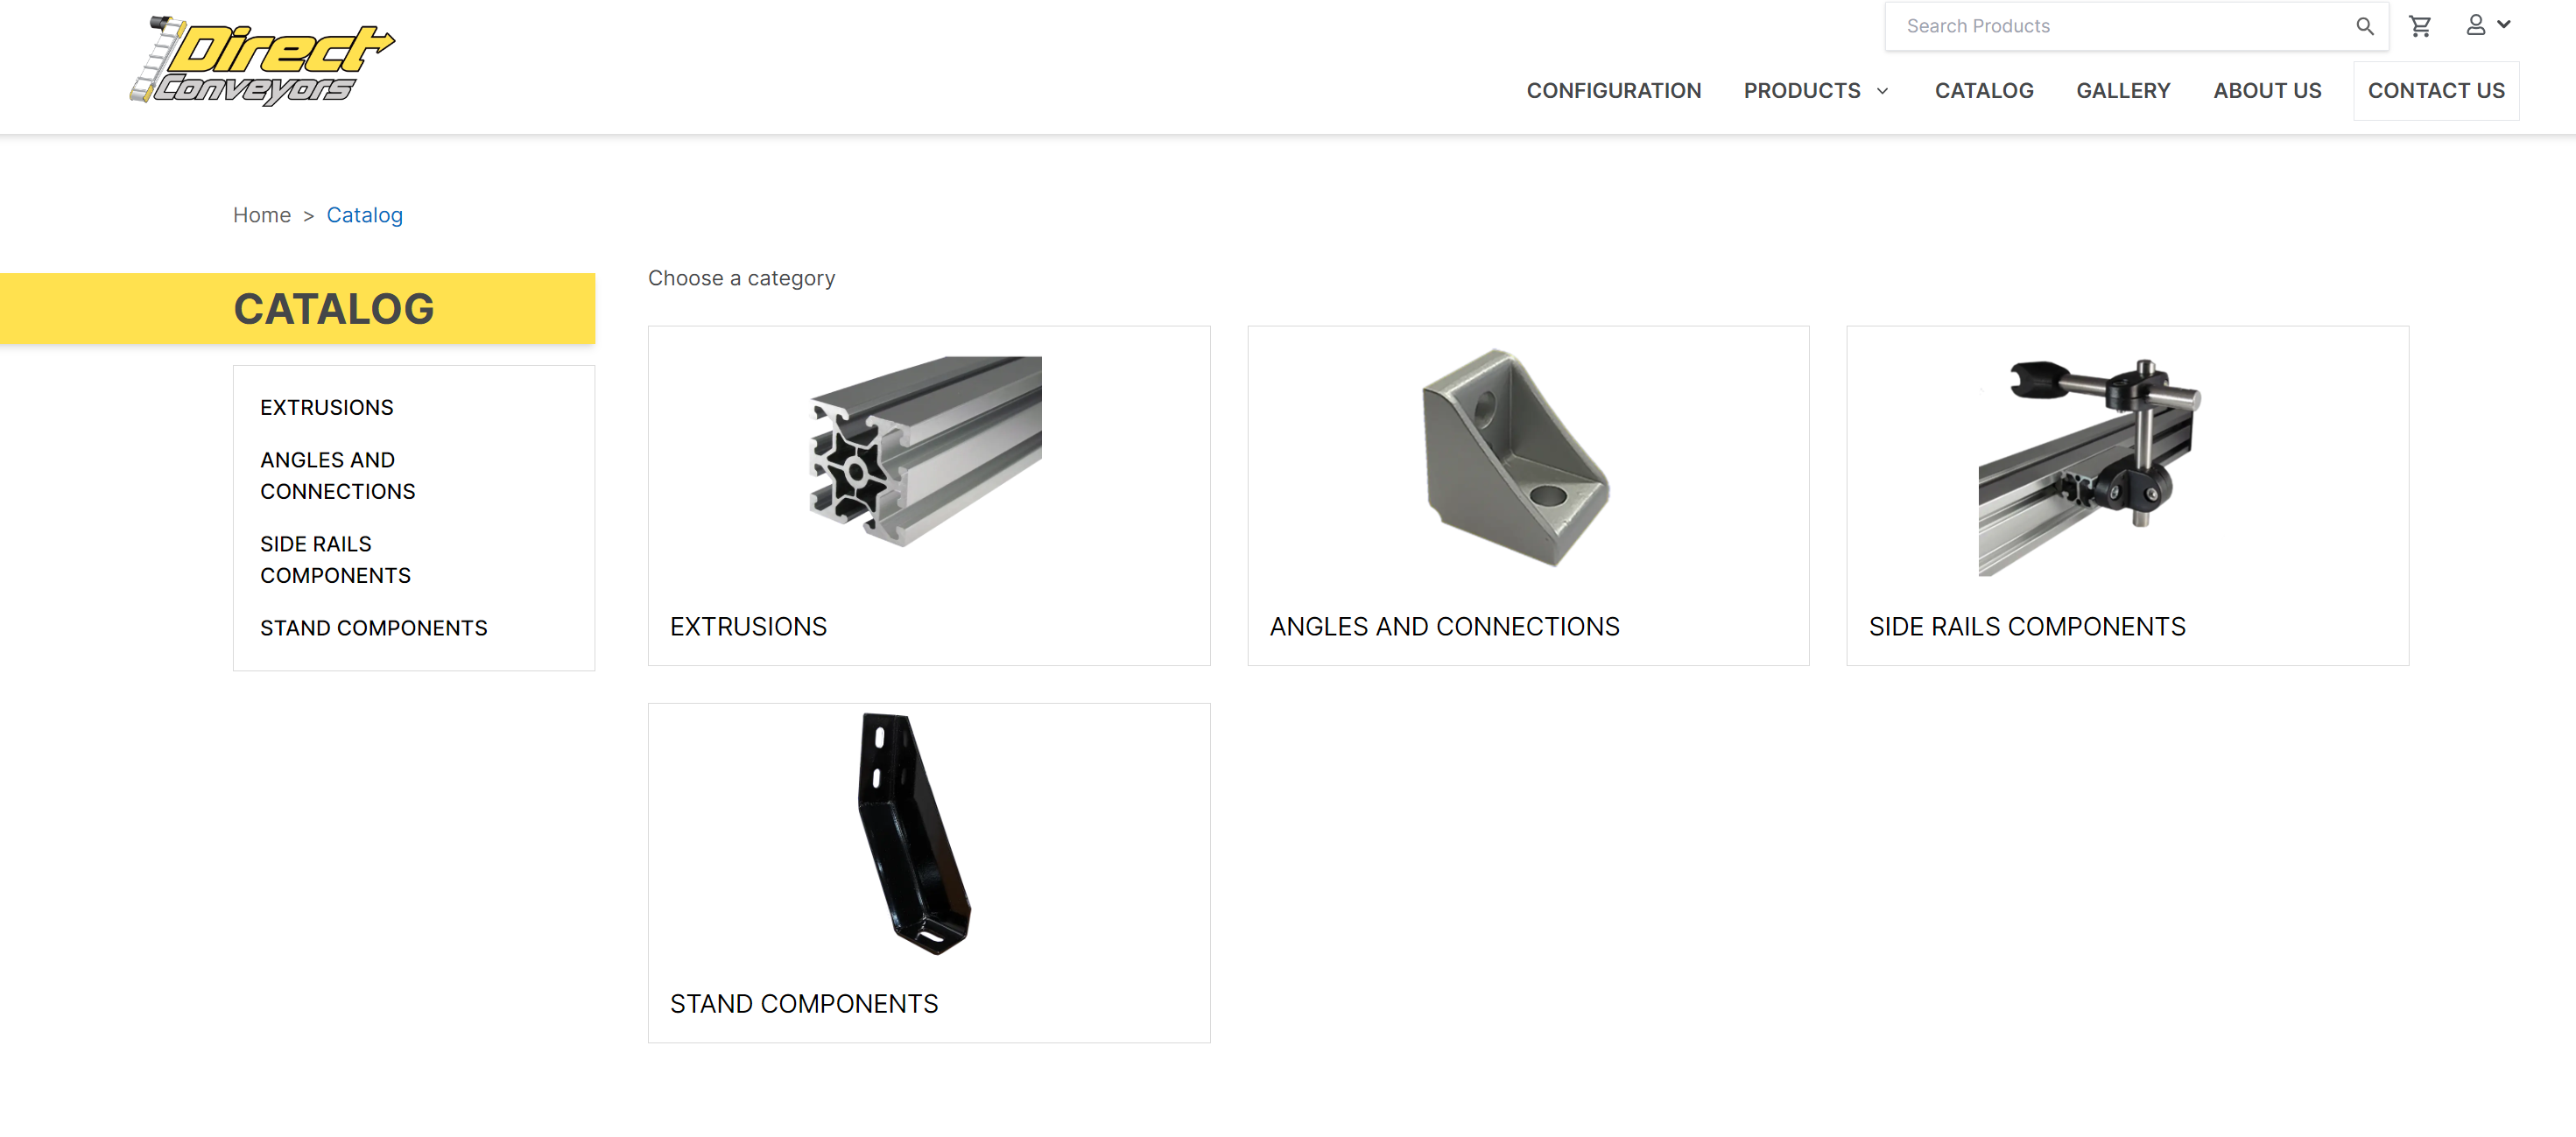 A screenshot showing the product catalog on the website. 